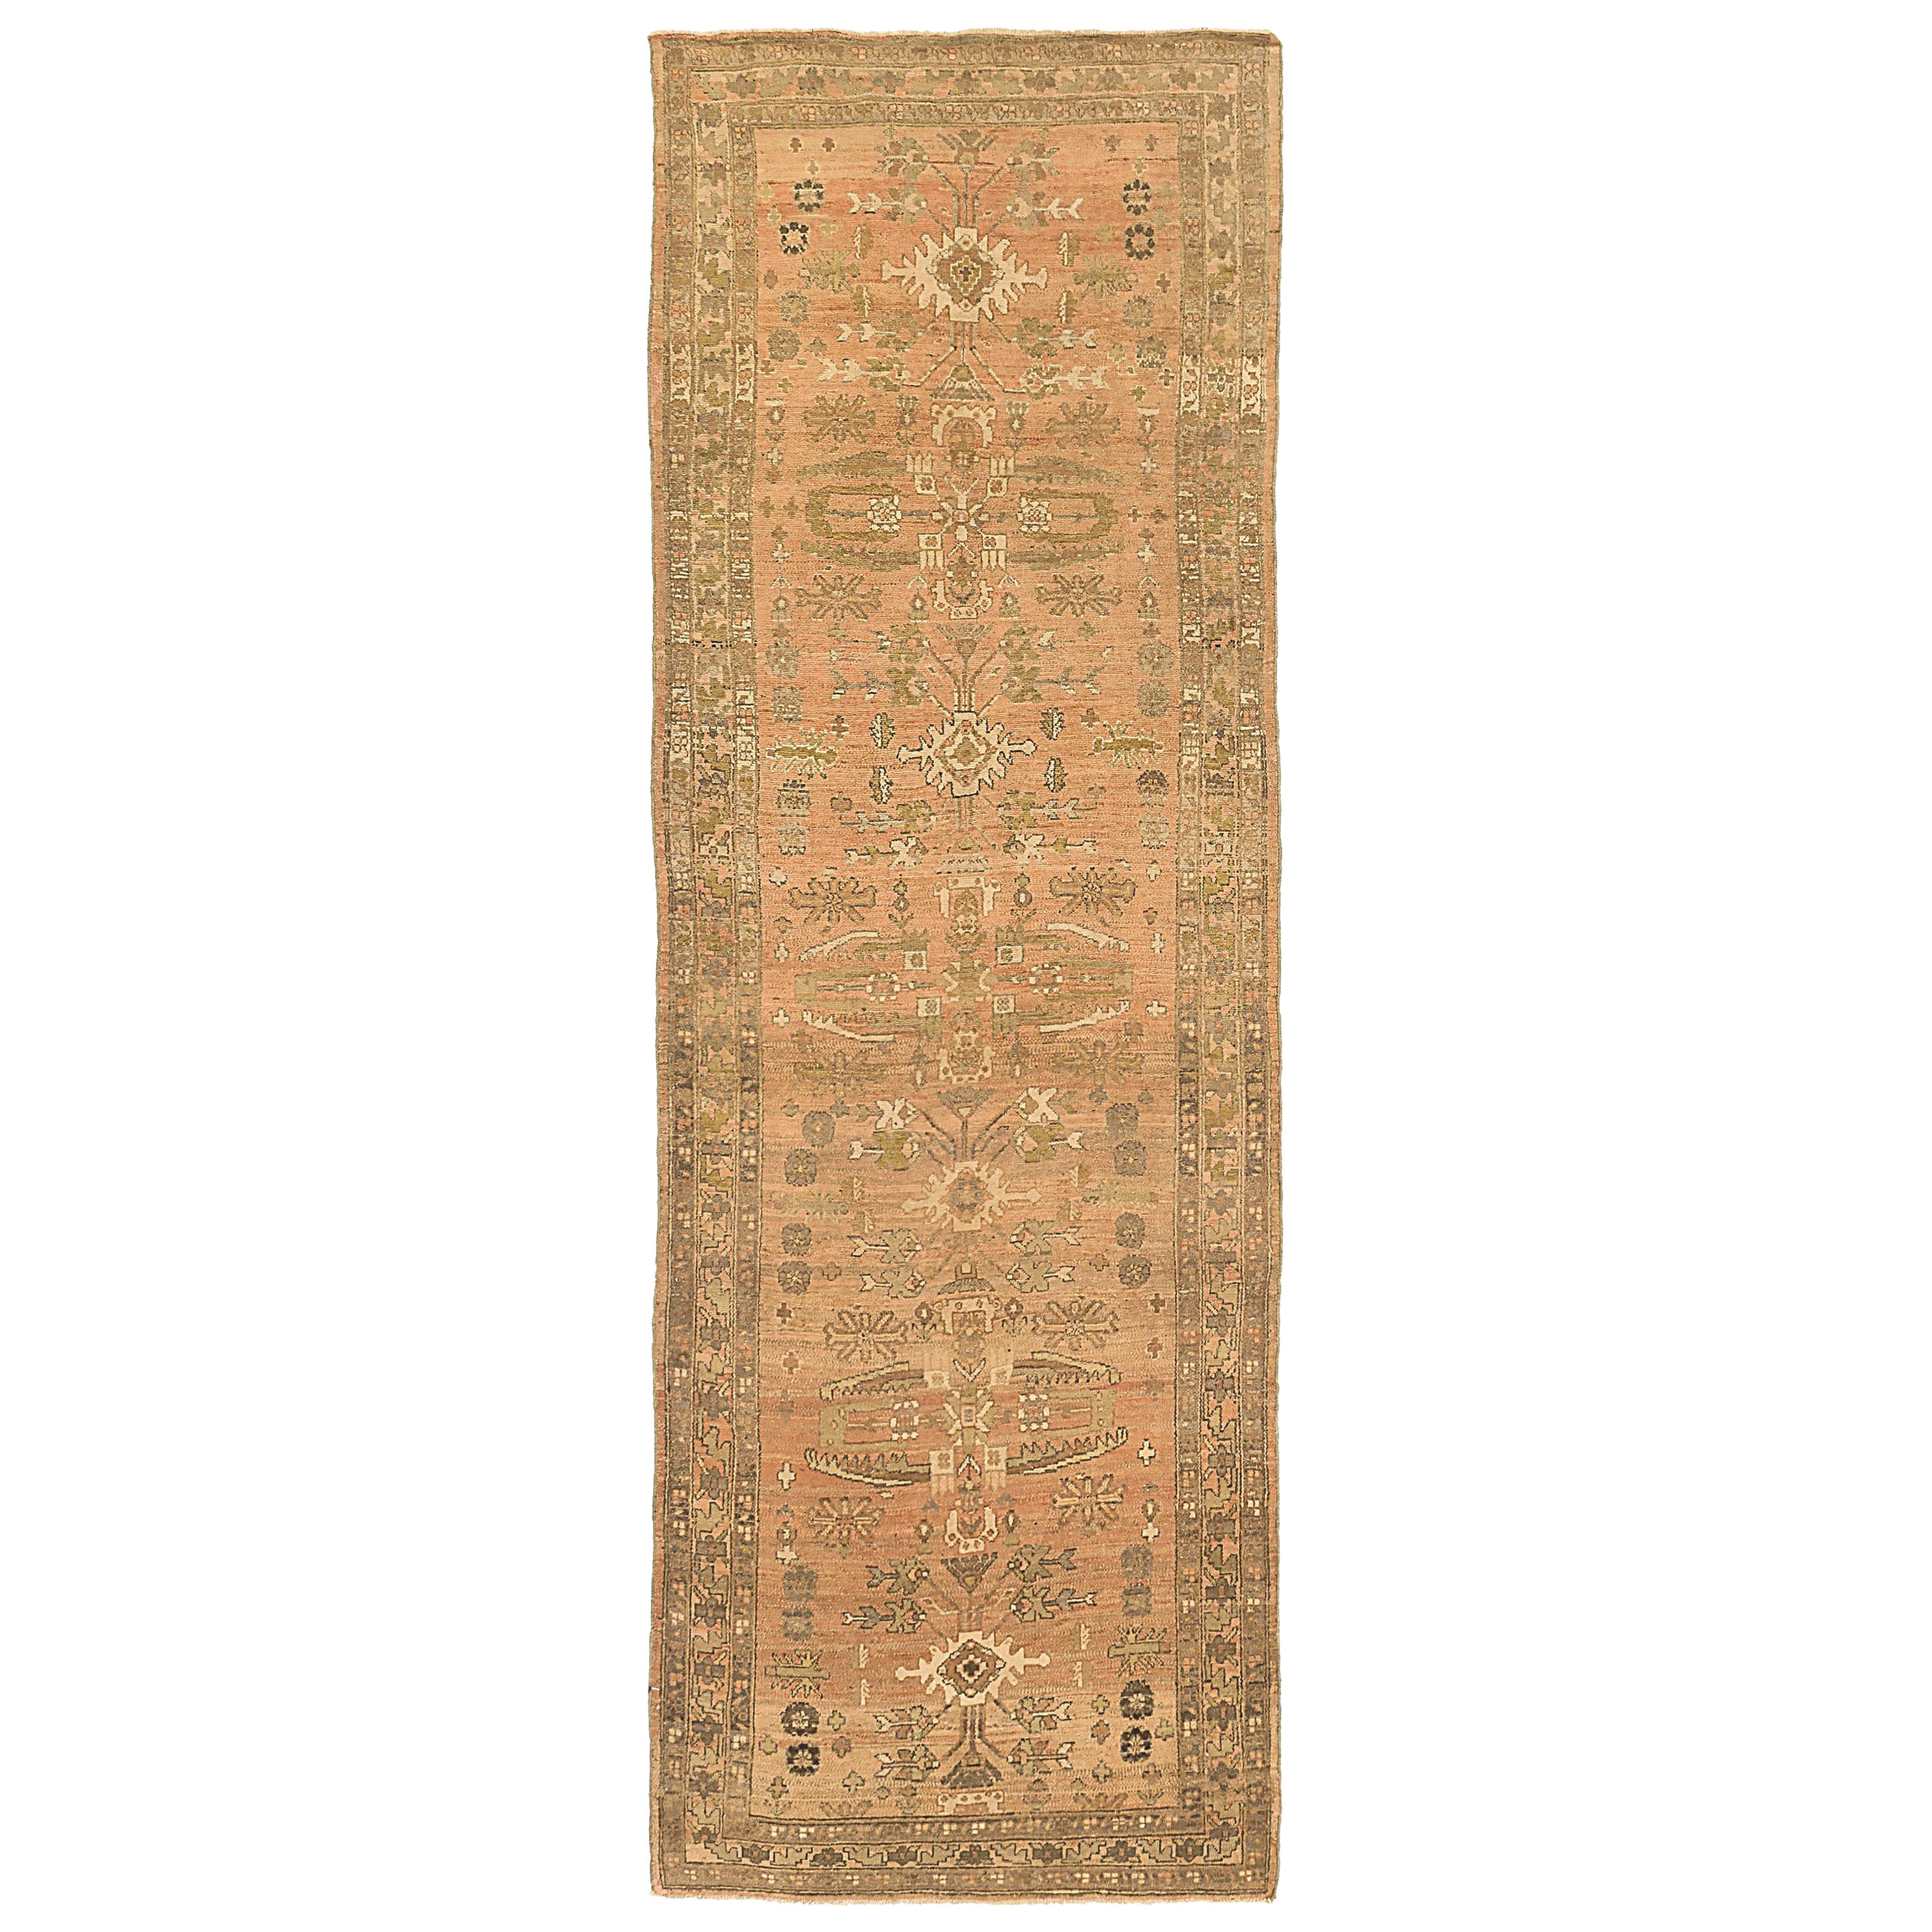 Antique Persian Koliai Runner Rug with Tribal and Floral Details on Ivory Field